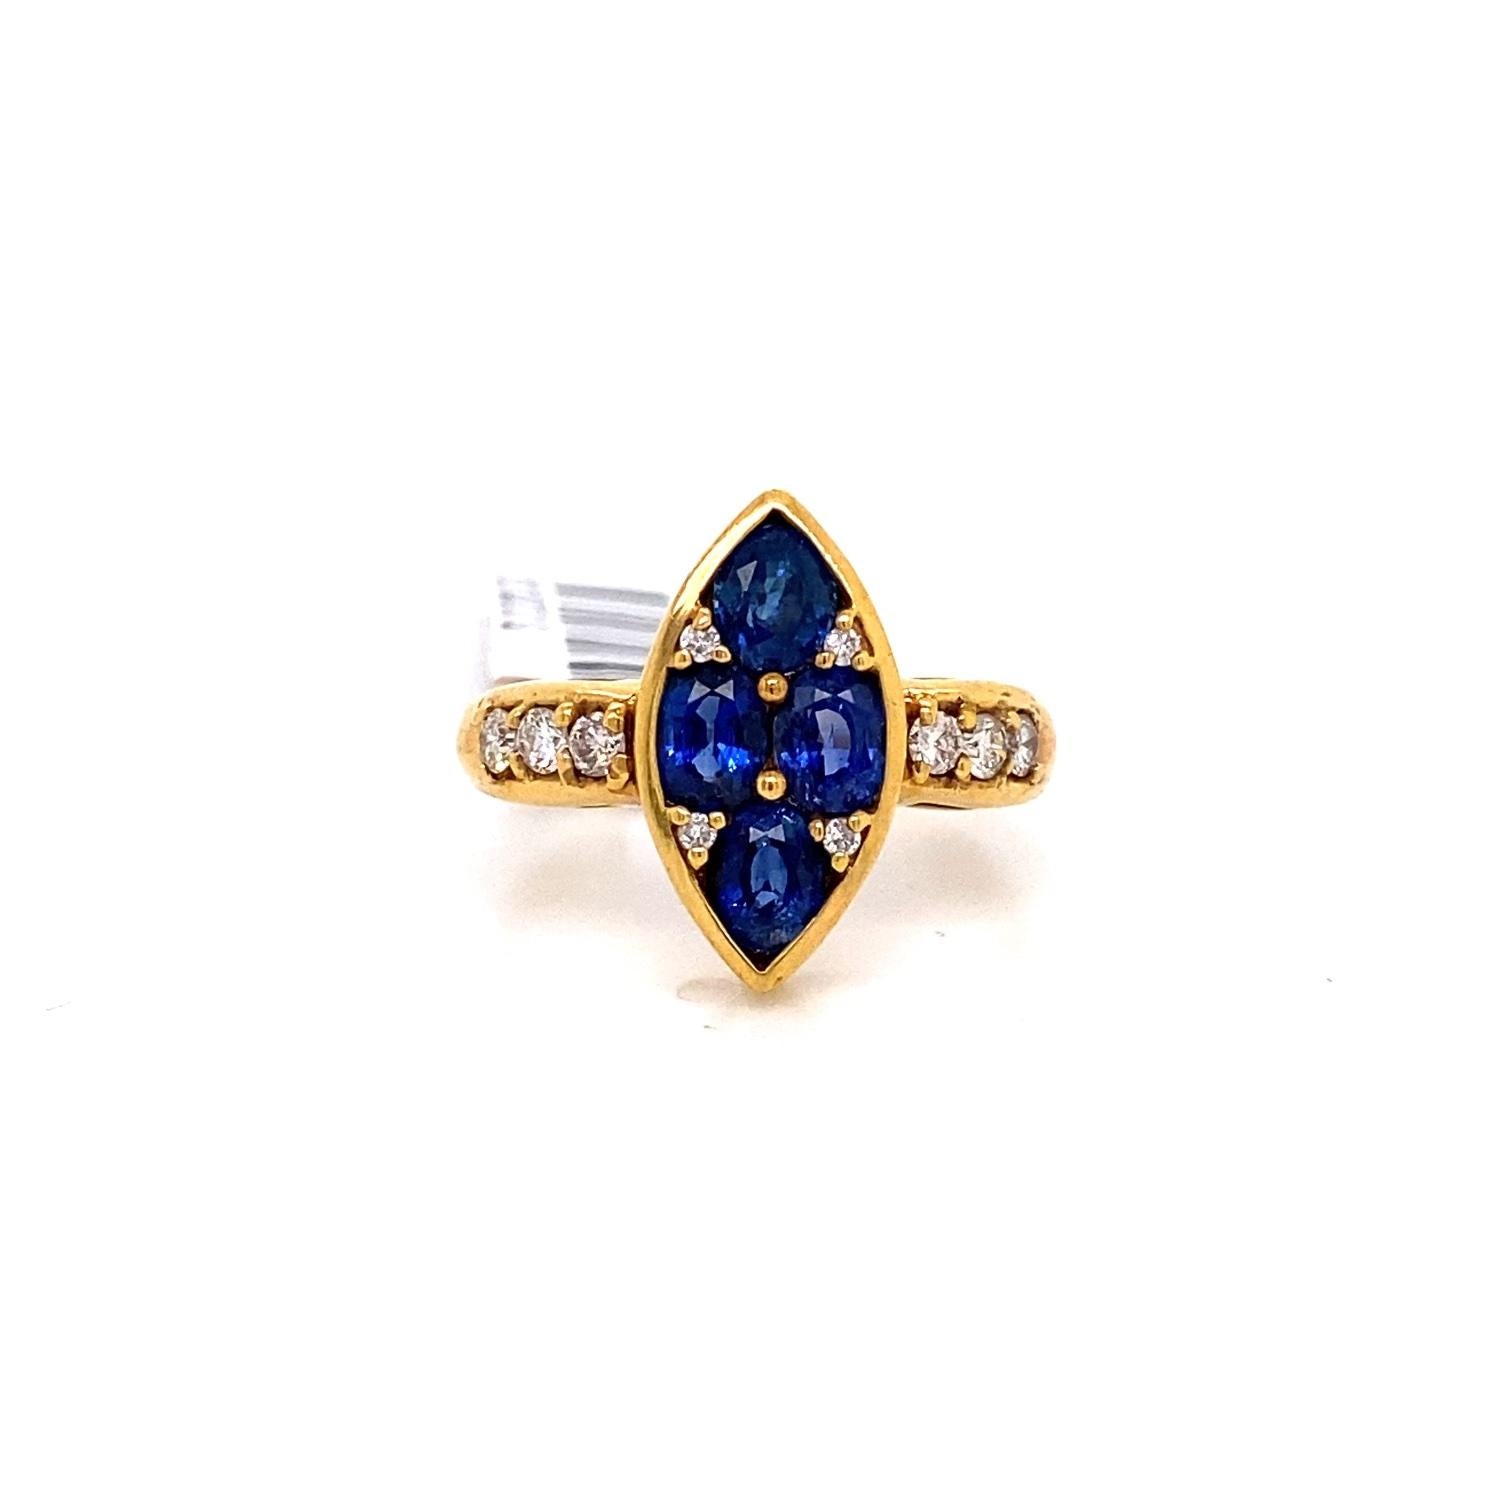 Blue Sapphire Ring with Diamonds and Gold In New Condition For Sale In Los Angeles, CA